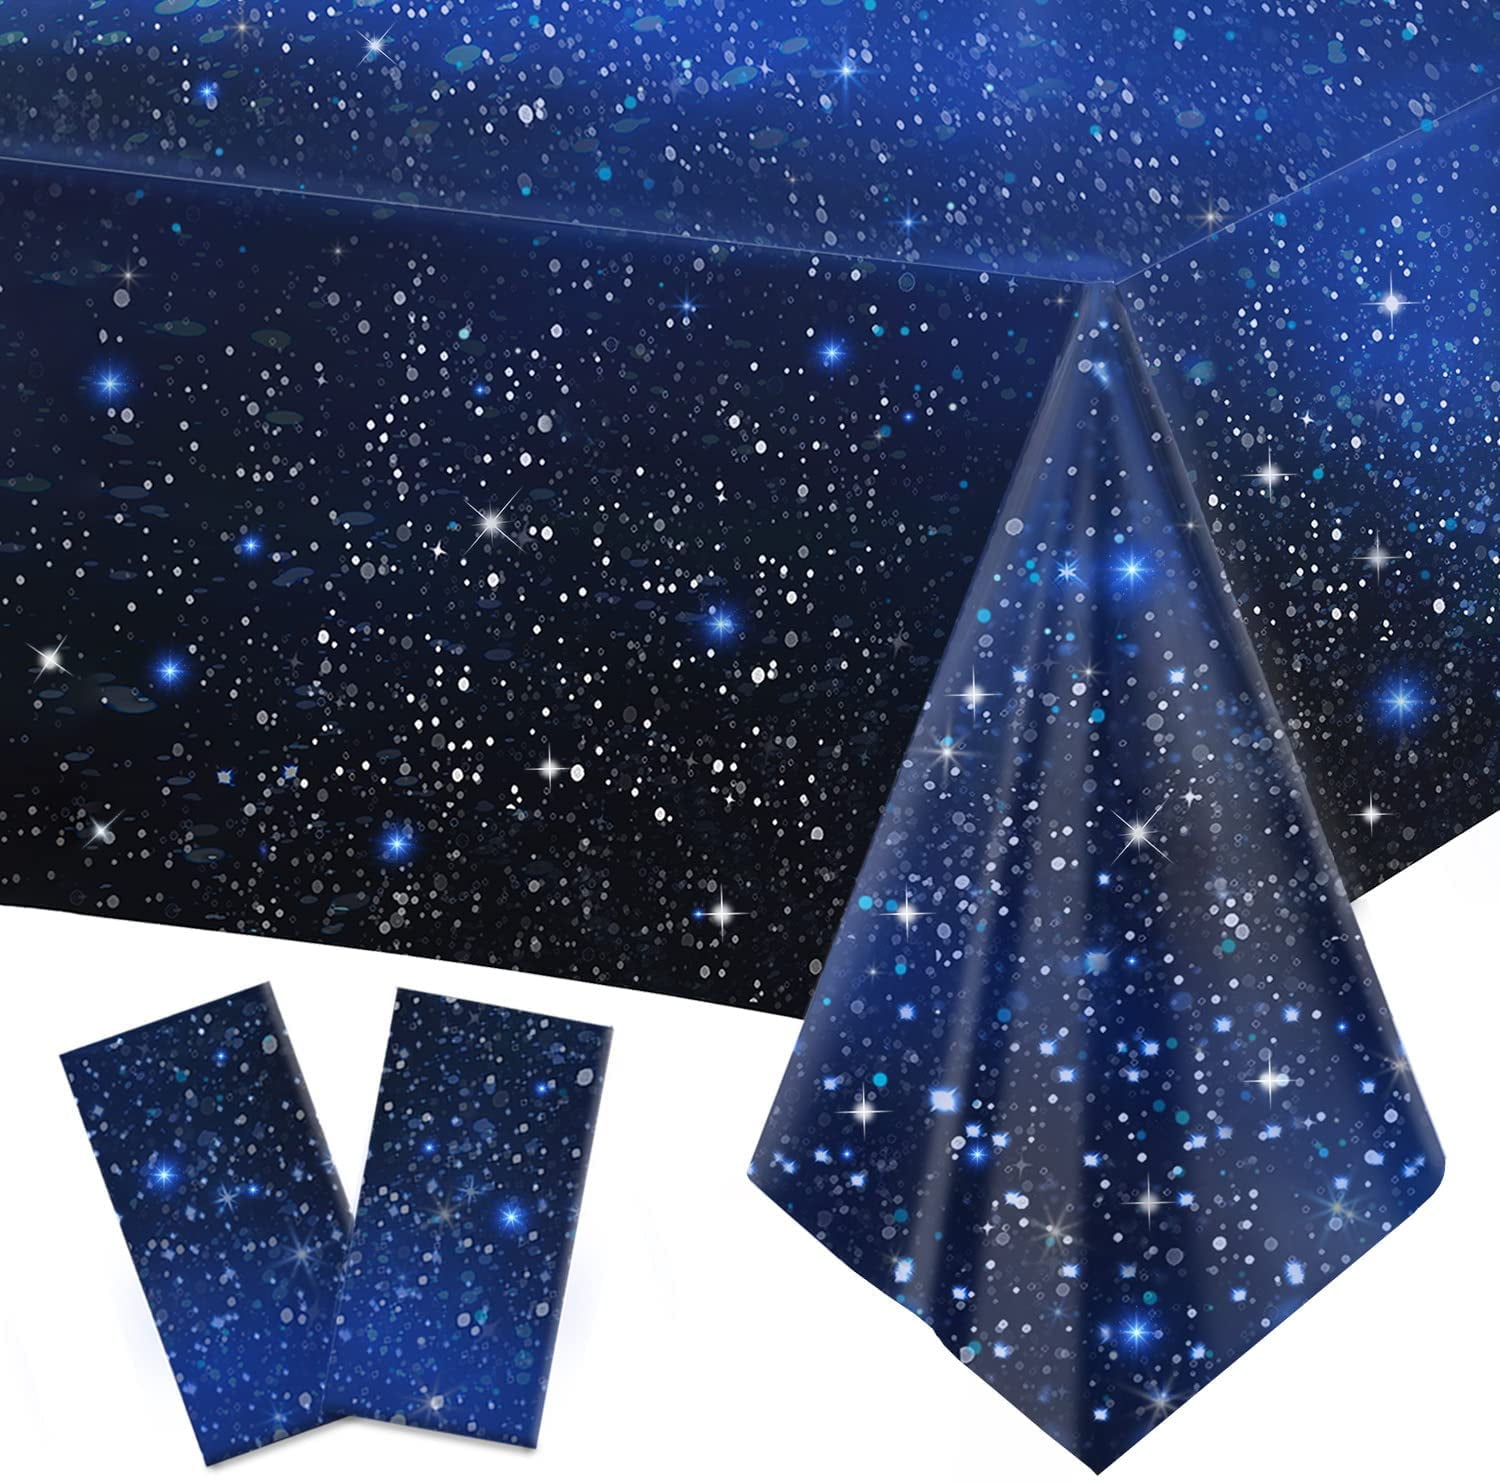 54 x 108 Inch Space Tablecloth Starry Night Tablecloth Decorations Plastic Galaxy Table Cover Space Stars Theme Party Supplies for Birthday Home Decorations 3 Pieces 